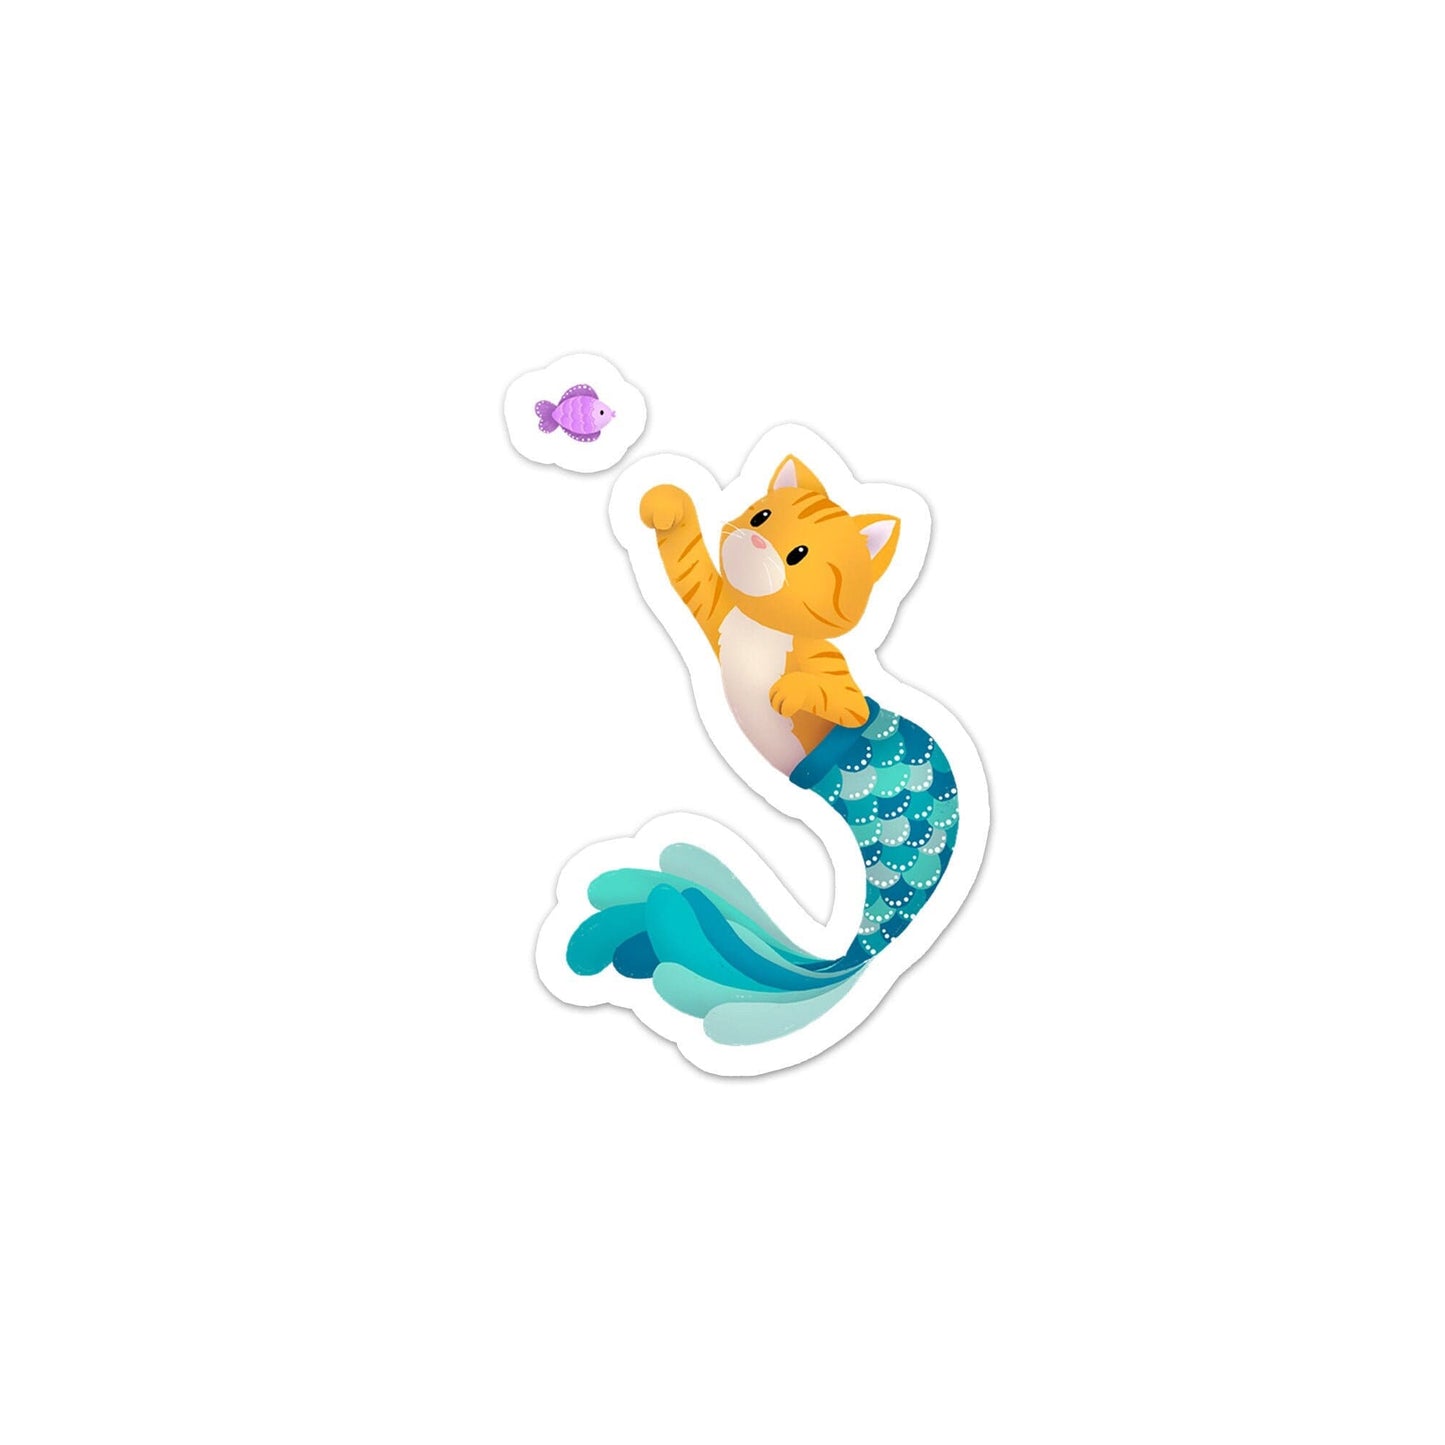 Purrmaid Jude & Purple Fish (Ginger Tabby with Teal Mermaid Tail) - Vinyl Sticker, Stickers, Decorative Stickers